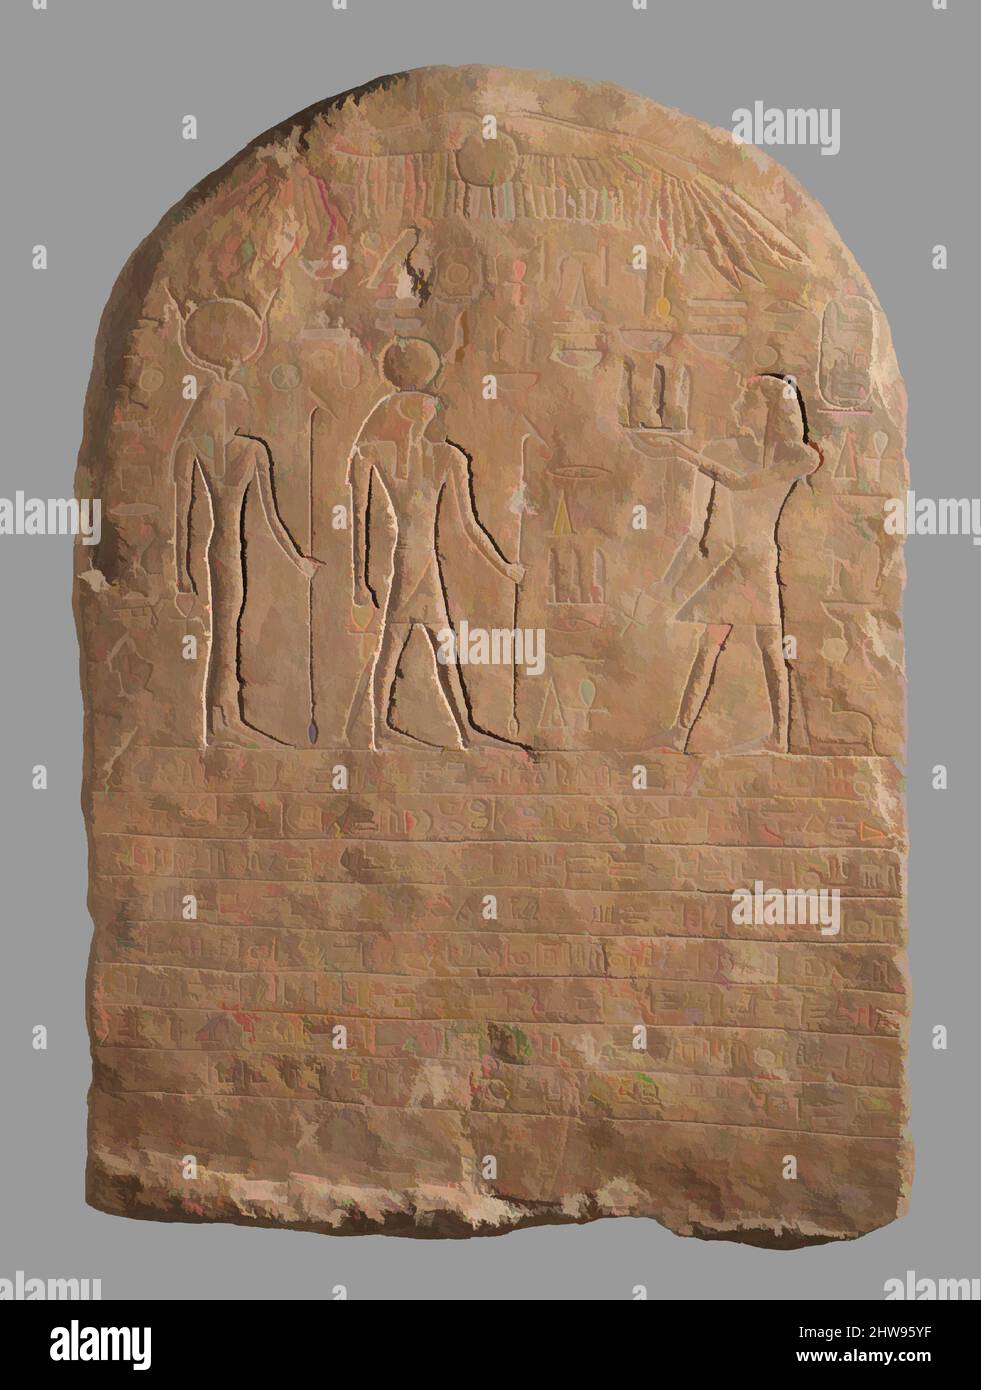 Art inspired by Donation Stela of Osorkon I dated to year 6, Third Intermediate Period, Dynasty 22, ca. 924–889 B.C., From Egypt, Memphite Region; Possibly from Heliopolis (Ain Shams), Limestone, H. 70 cm (27 9/16 in), From the Third Intermediate Period through the Saite Period a large, Classic works modernized by Artotop with a splash of modernity. Shapes, color and value, eye-catching visual impact on art. Emotions through freedom of artworks in a contemporary way. A timeless message pursuing a wildly creative new direction. Artists turning to the digital medium and creating the Artotop NFT Stock Photo